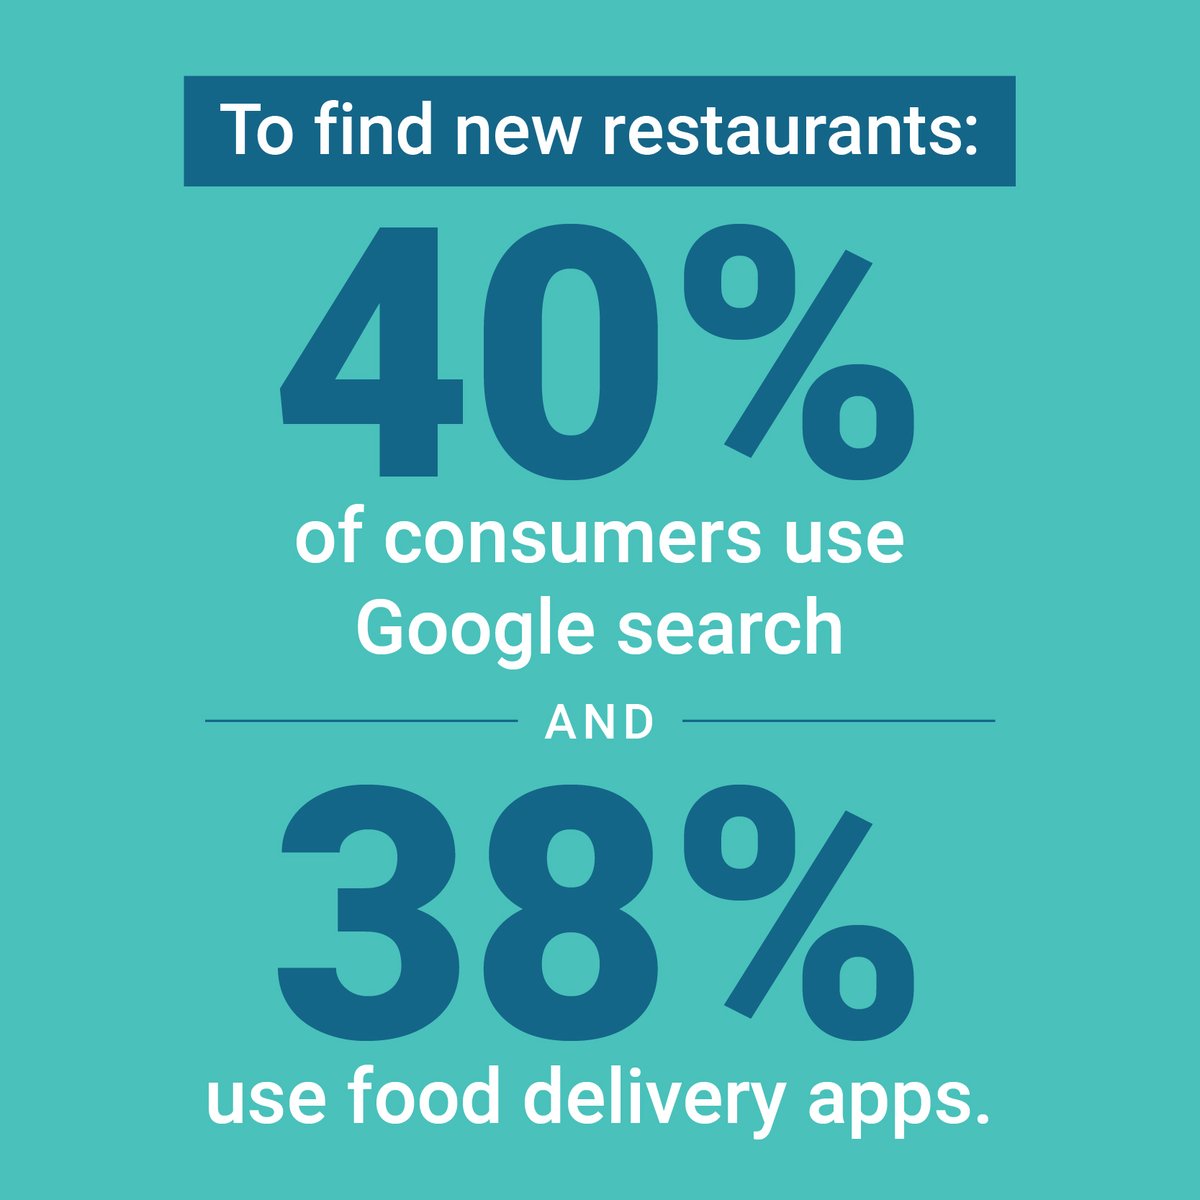 Our innovative solutions can ensure you’re on top of your game in the kitchen, but to be top-of-mind to hungry customers, explore other innovative solutions like paid search and food delivery apps.

Read the full article here ow.ly/5lPP50RmA90

#restauranttechnologies #food